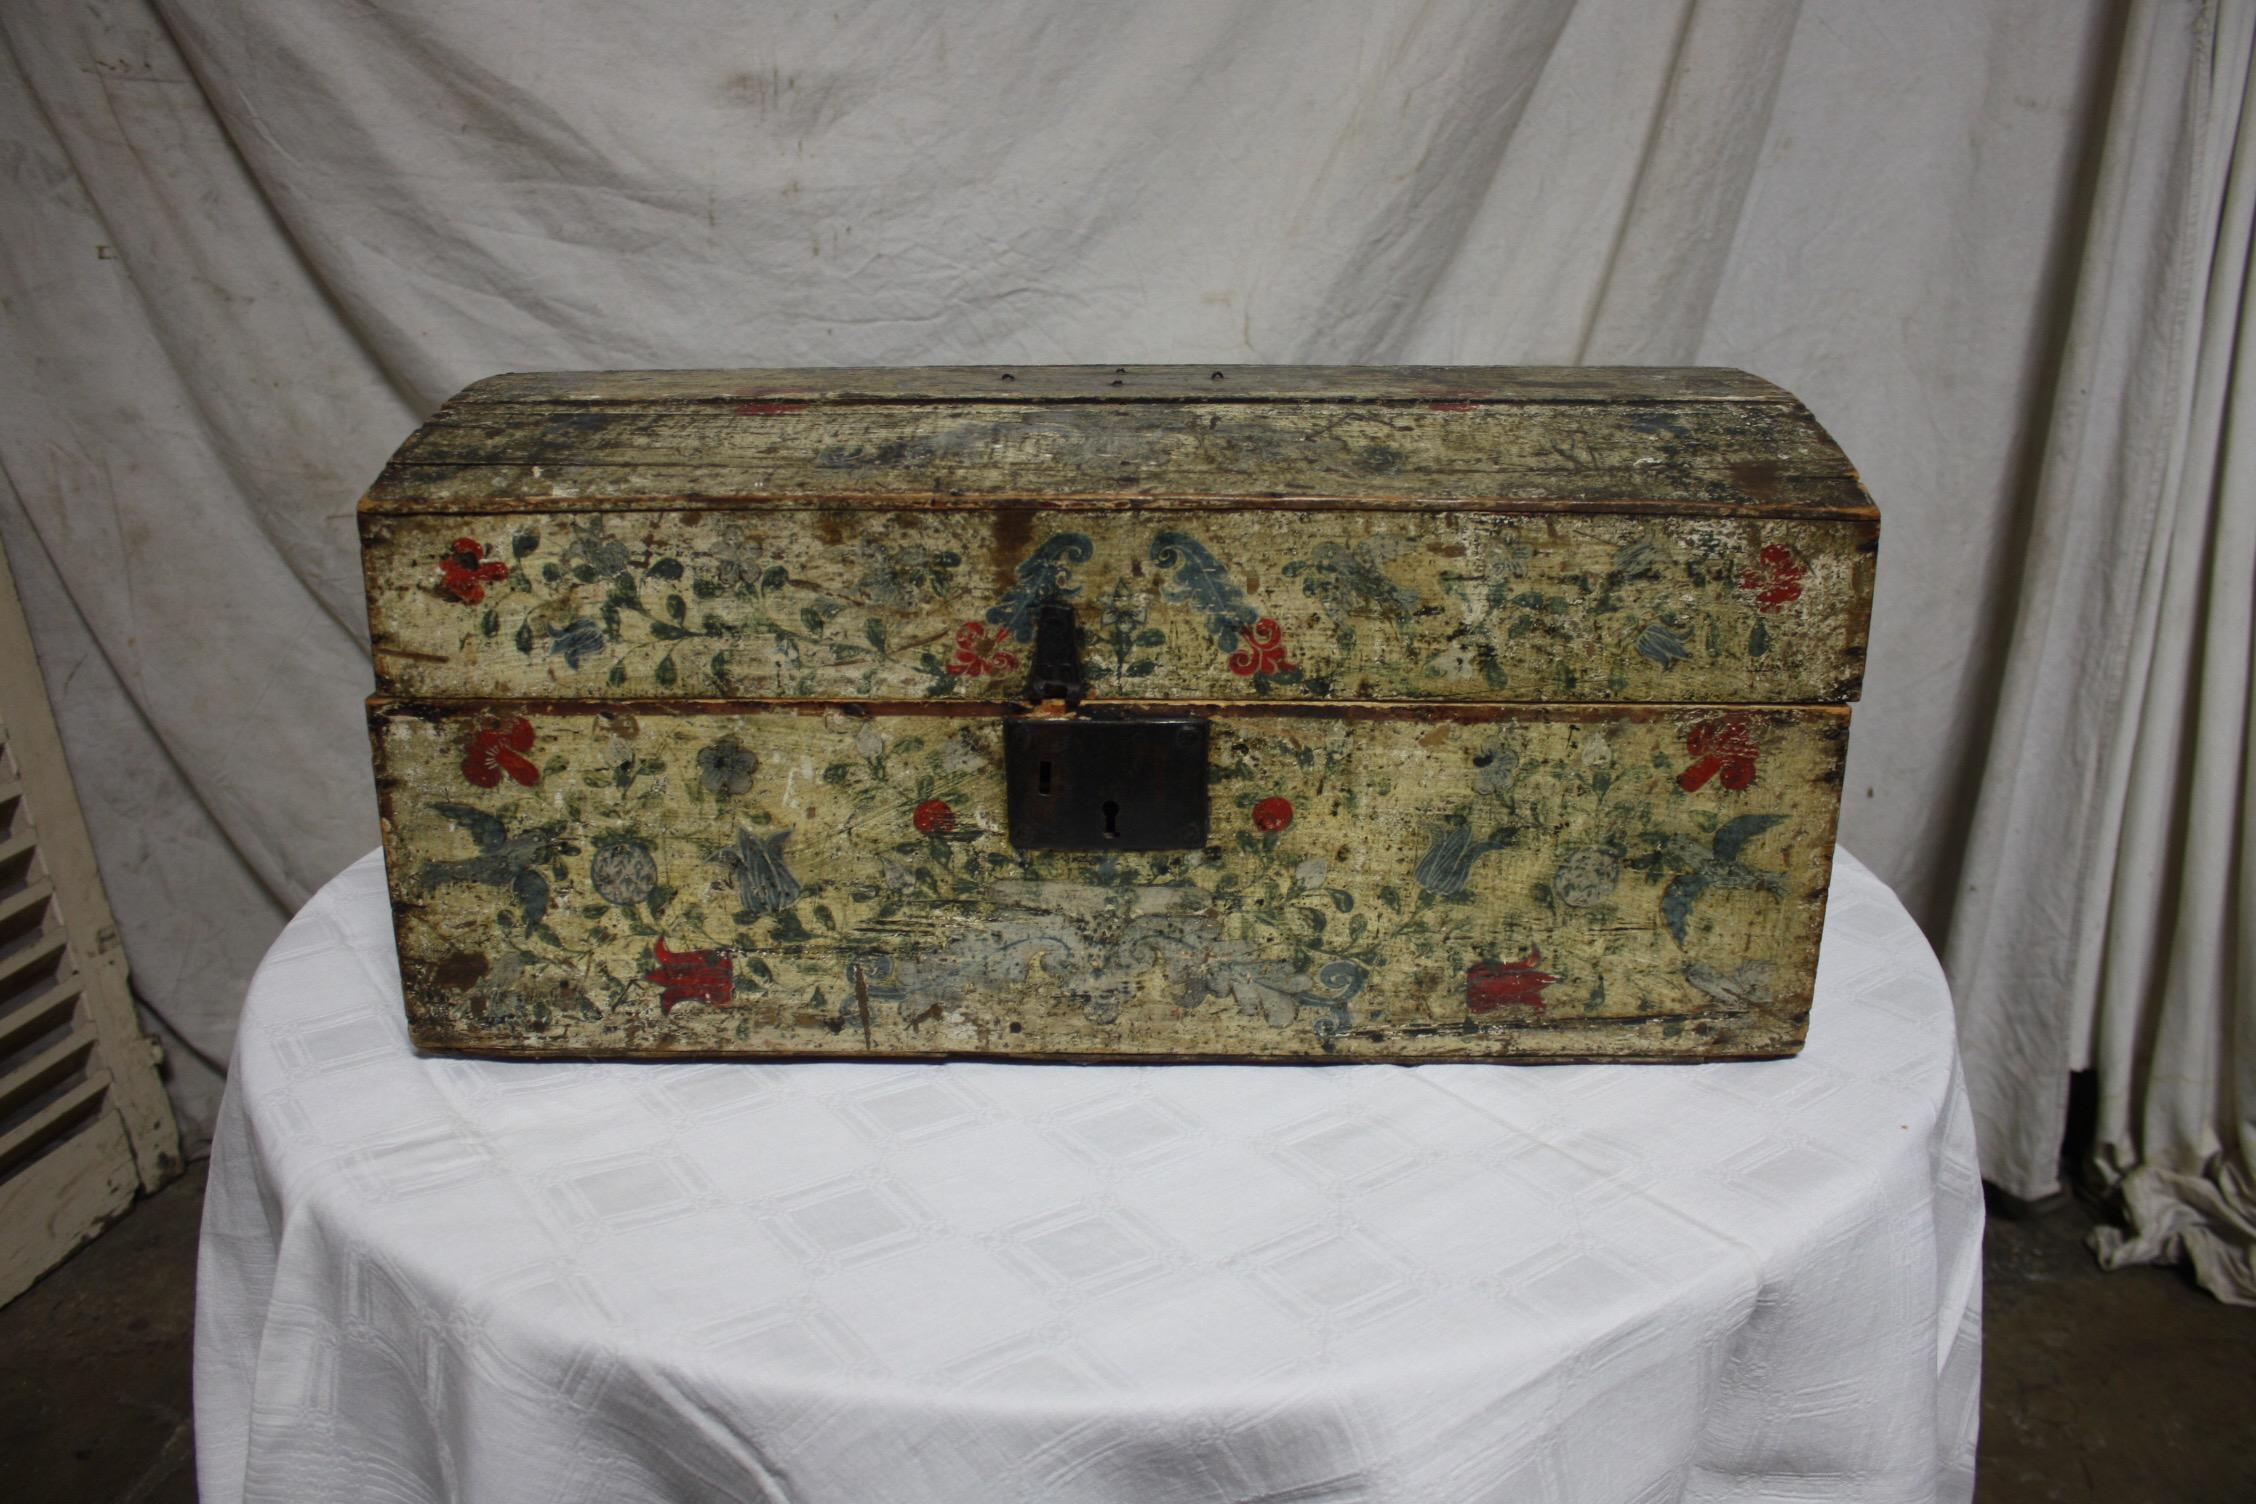 French 18th century painted box. This work comes from Normandy France.